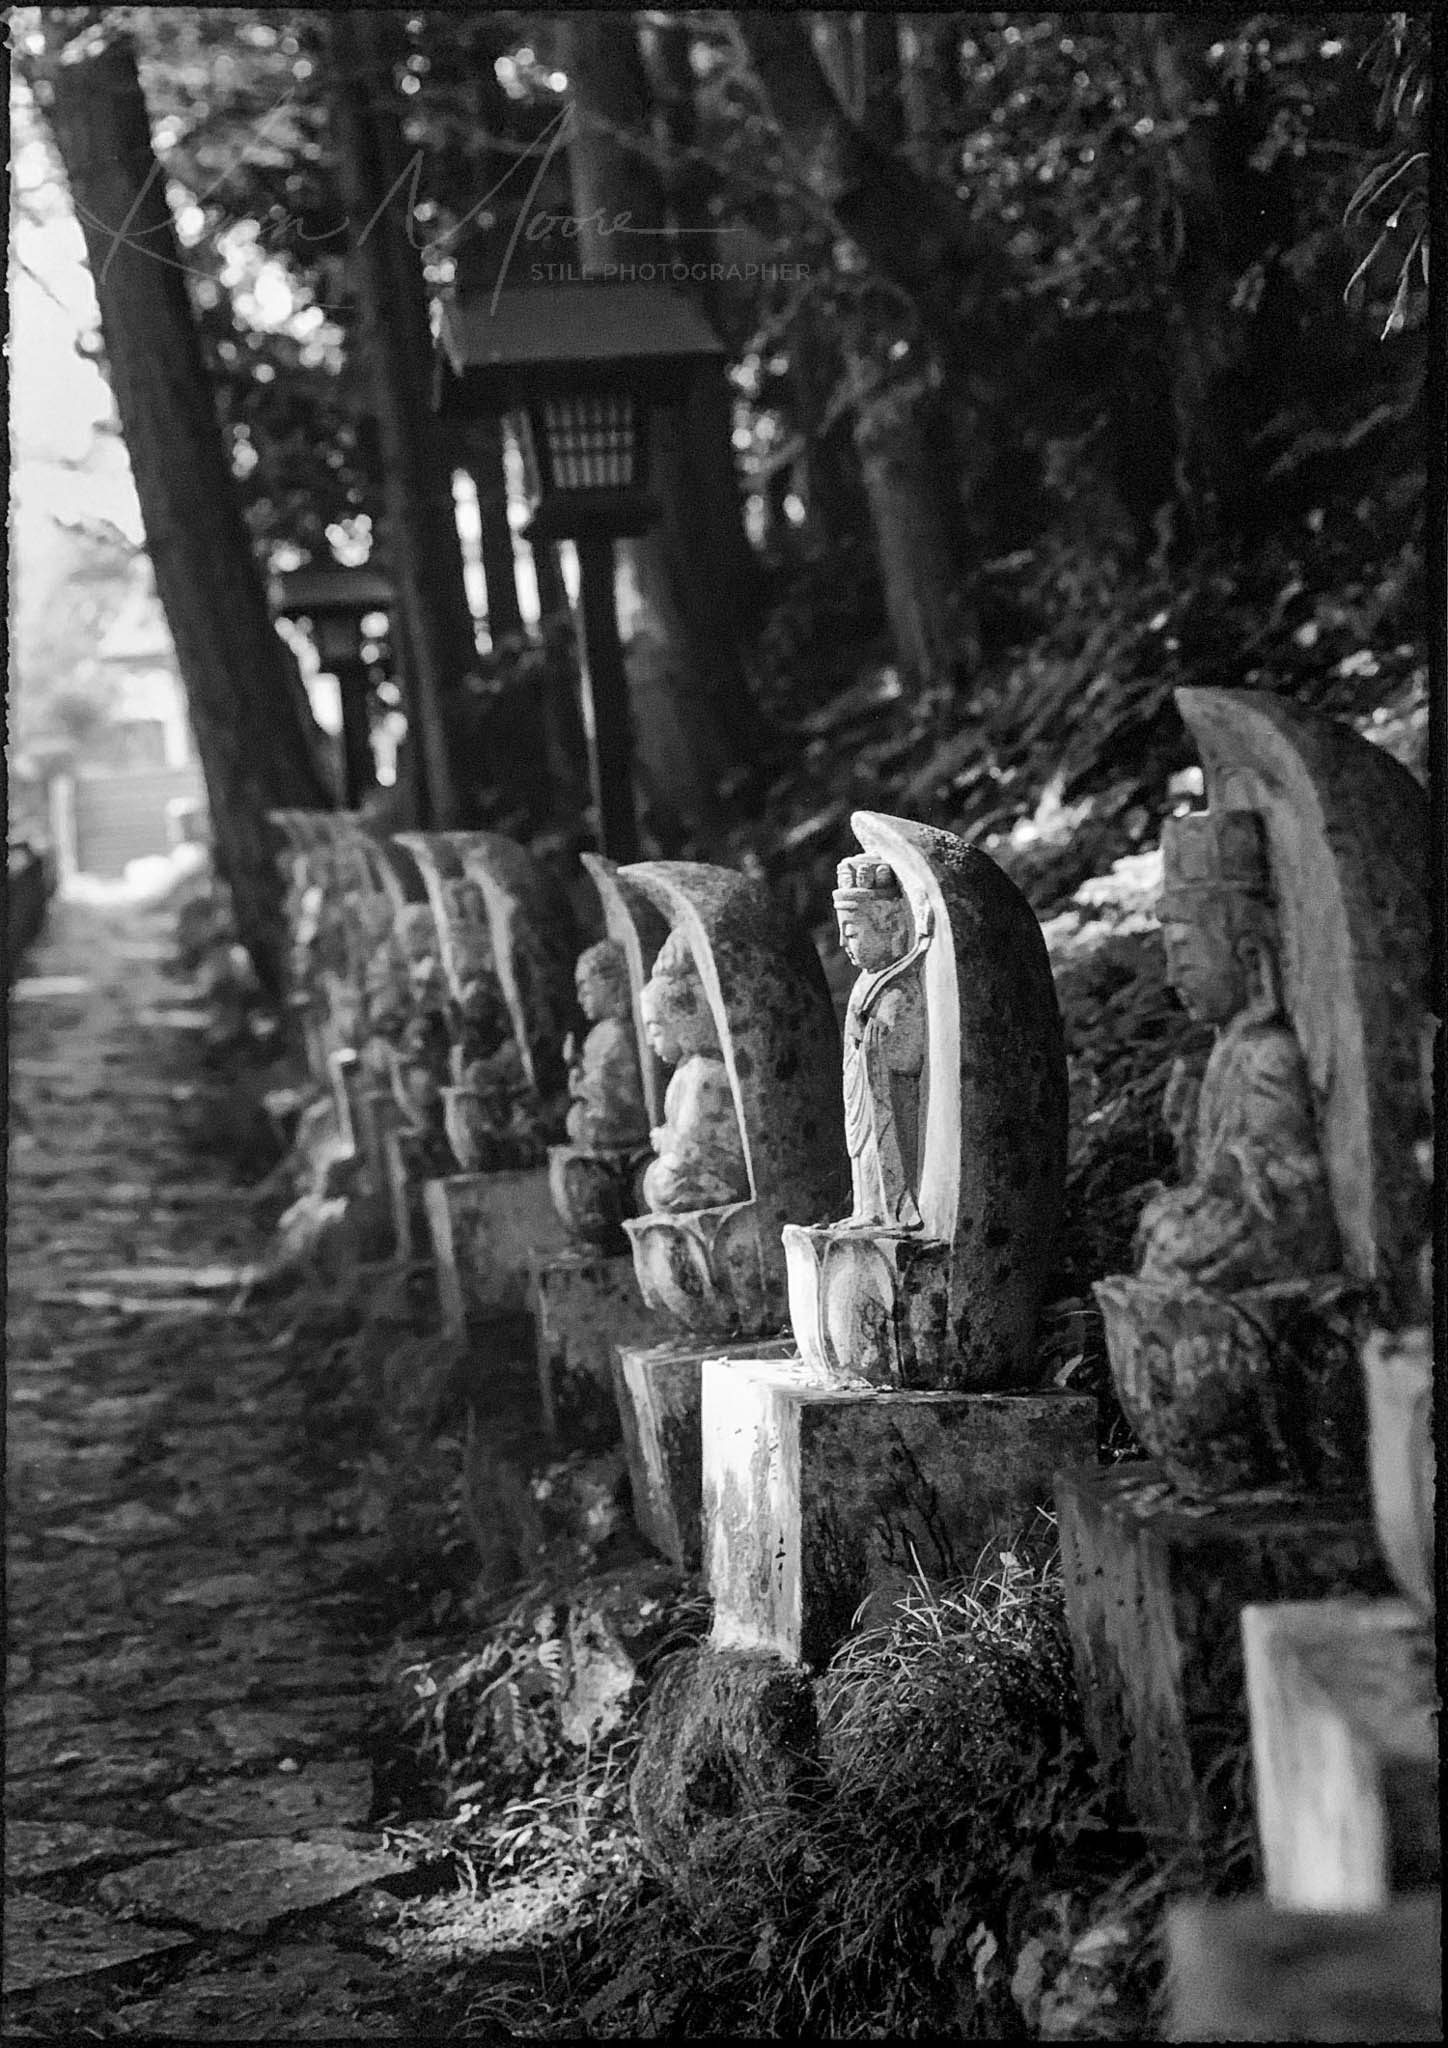 Black and white image of Jizo statues in a serene forested pathway in Japan.